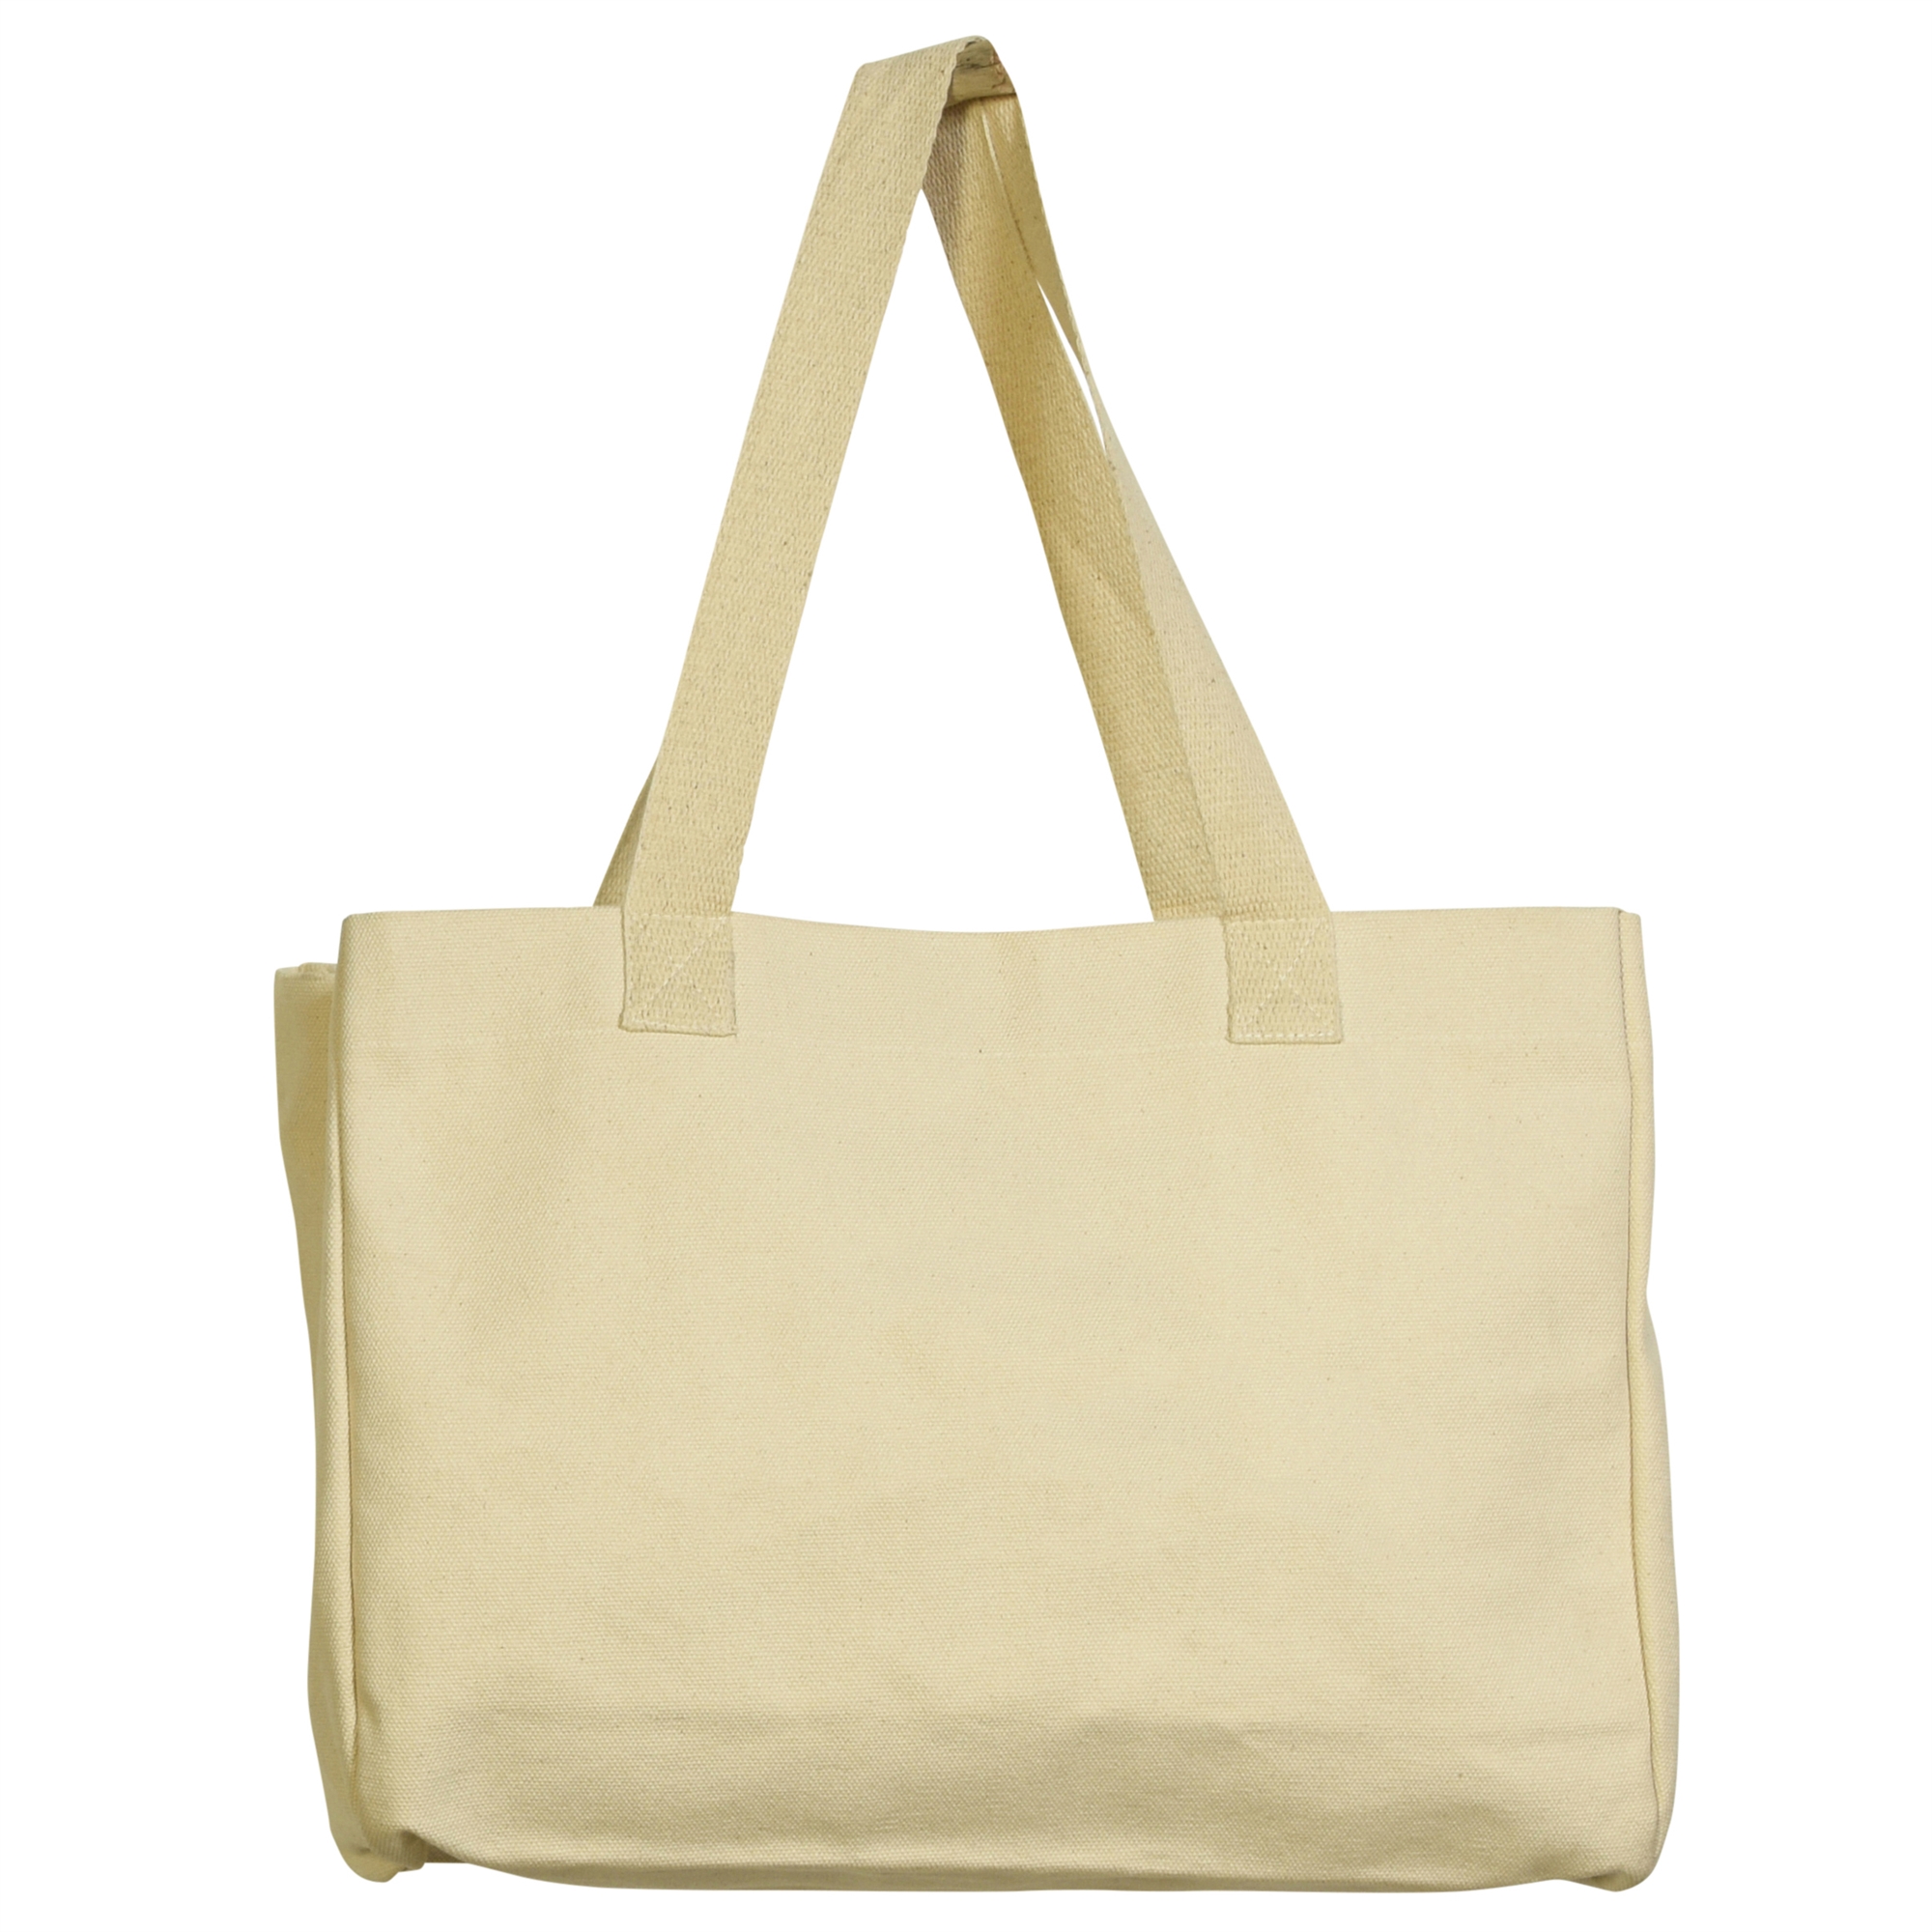 Canvas Beach Tote by HomArt - Seven Colonial